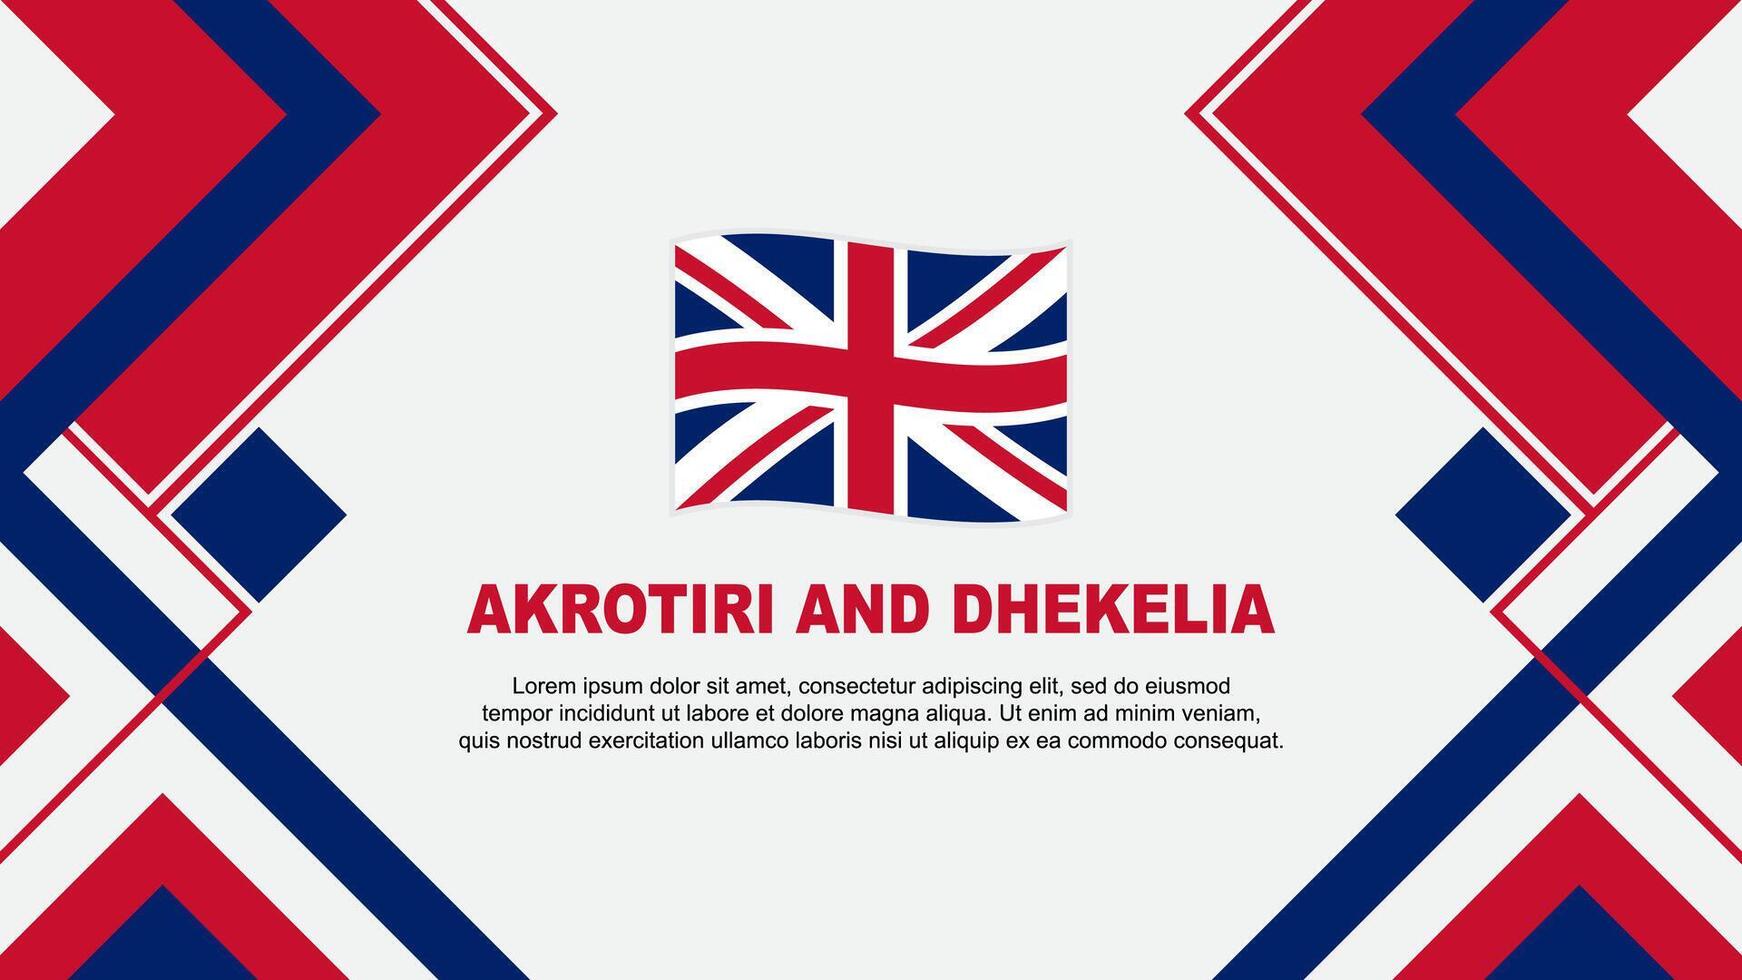 Akrotiri And Dhekelia Flag Abstract Background Design Template. Akrotiri And Dhekelia Independence Day Banner Wallpaper Vector Illustration. Banner